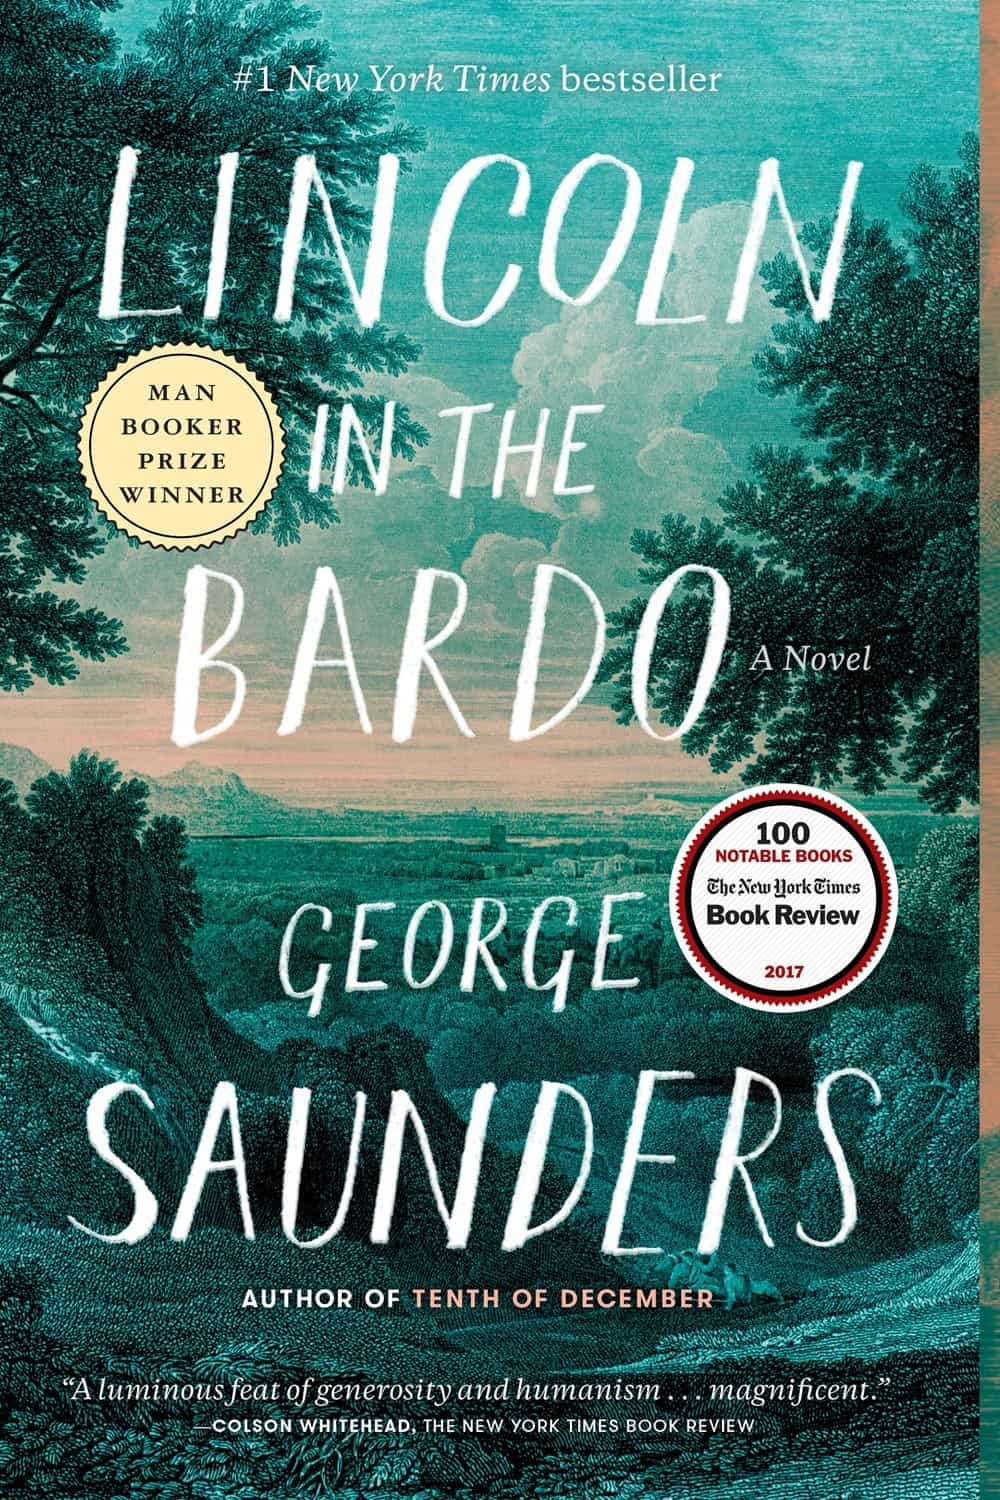 <ul> <li><strong>Runtime:</strong> 7 hours, 25 minutes</li>    <li><strong>Author:</strong> George Saunders</li>    <li><strong>Narrators:</strong> Nick Offerman, George Saunders, Carrie Brownstein, Bill Hader, Don Cheadle, Julianne Moore, Ben Stiller, Susan Sarandon</li> </ul>    <p>Speaking of a full cast of characters, audiobook fans highlight George Saunders's <em>Lincoln in the Bardo</em> as one of the best audiobooks ever recorded. The experimental novel blends history and the supernatural to tell the story of President Lincoln's grief after the loss of his son Willie. It features over a hundred characters, each with a distinct voice. Listeners are consistently captivated by the unconventional narrative style, the diverse cast of characters, and the poignant exploration of grief, loss, and the complexities of the human condition.</p>    <p>Buy on Amazon</p>